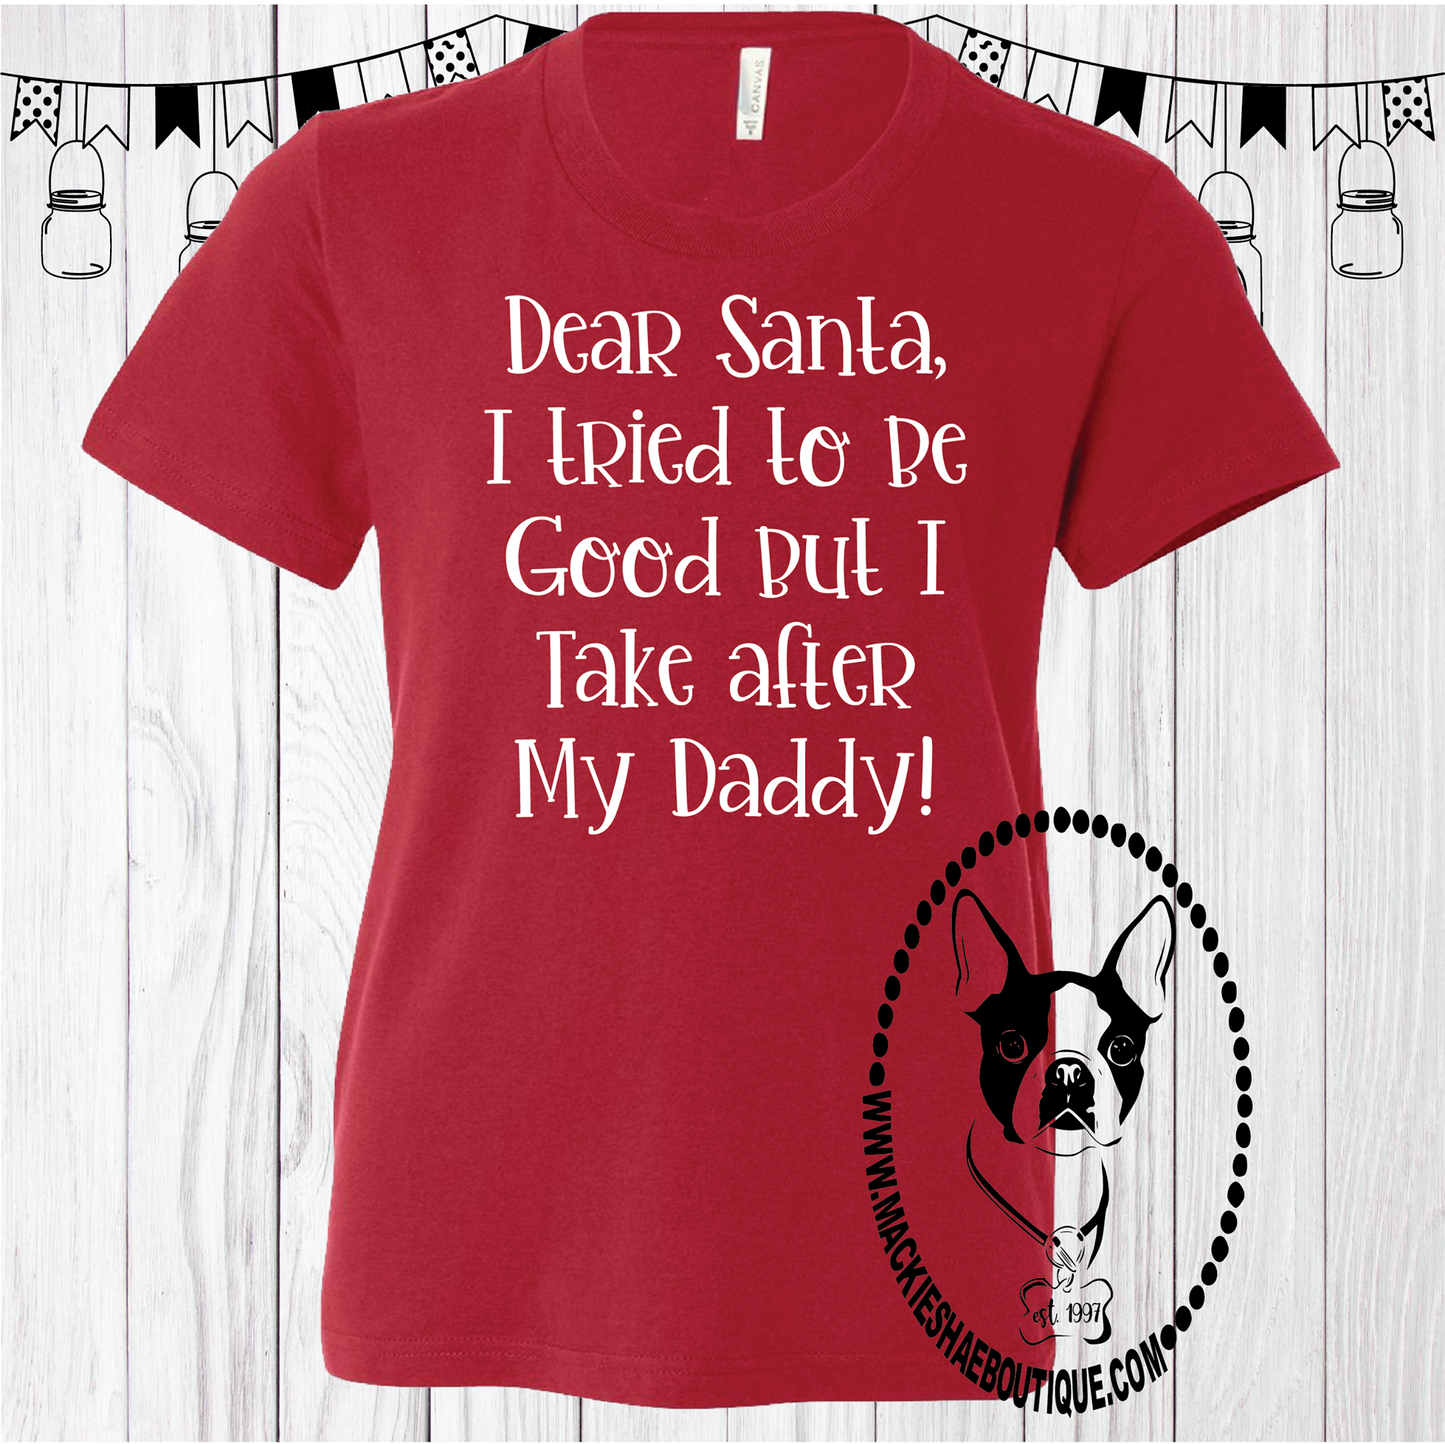 Dear Santa, I Tried To Be Good But I Take After My Daddy!  Custom Shirt for Kids, Short Sleeve